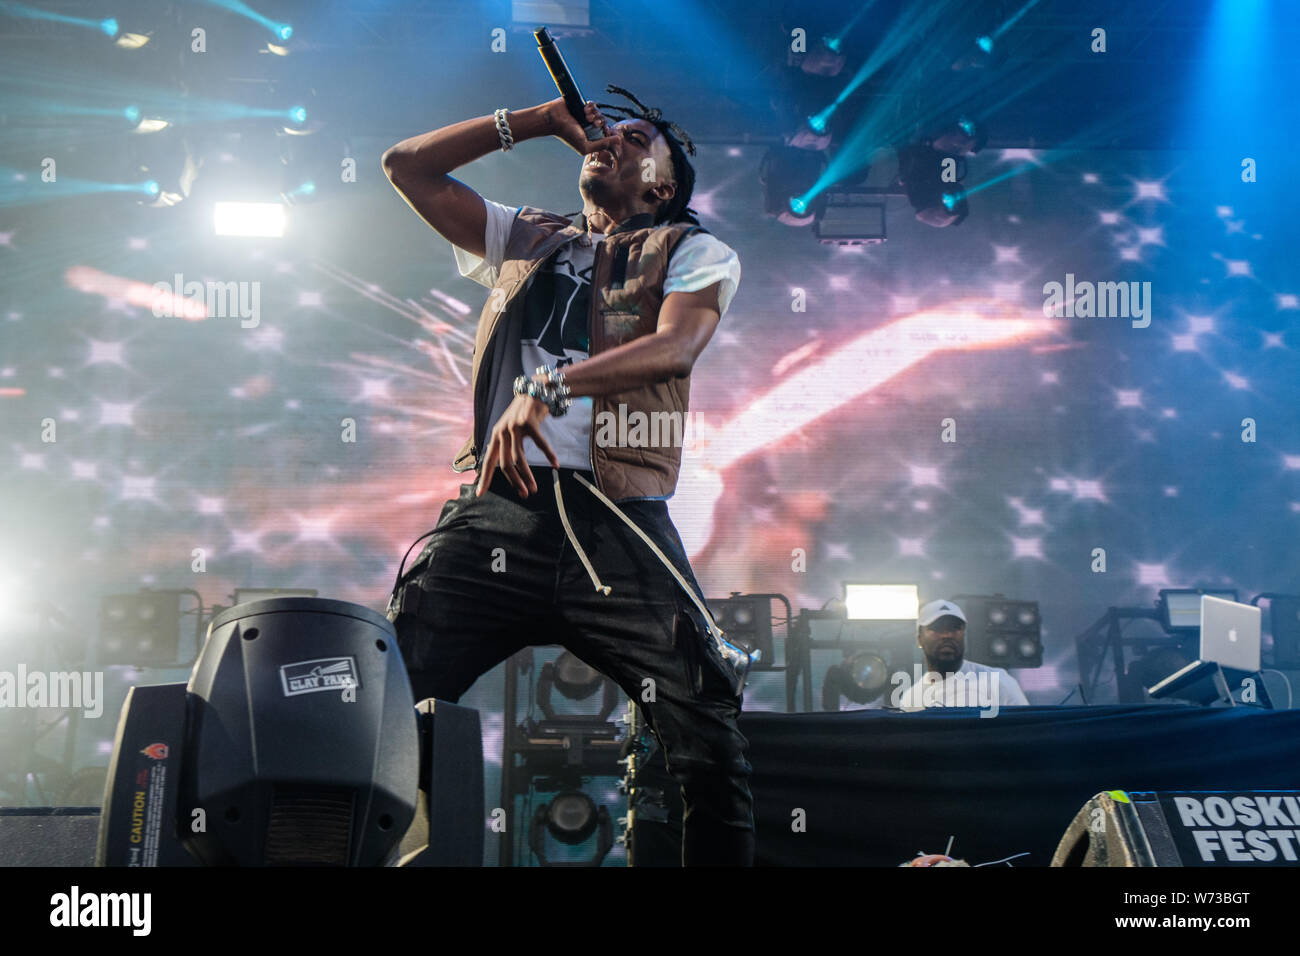 Denmark, Roskilde - July 1, 2017. The American rapper and lyricist Playboi Carti performs a live concert during the Danish music festival Roskilde Festival 2017. (Photo credit: Gonzales Photo - Bo Kallberg). Stock Photo